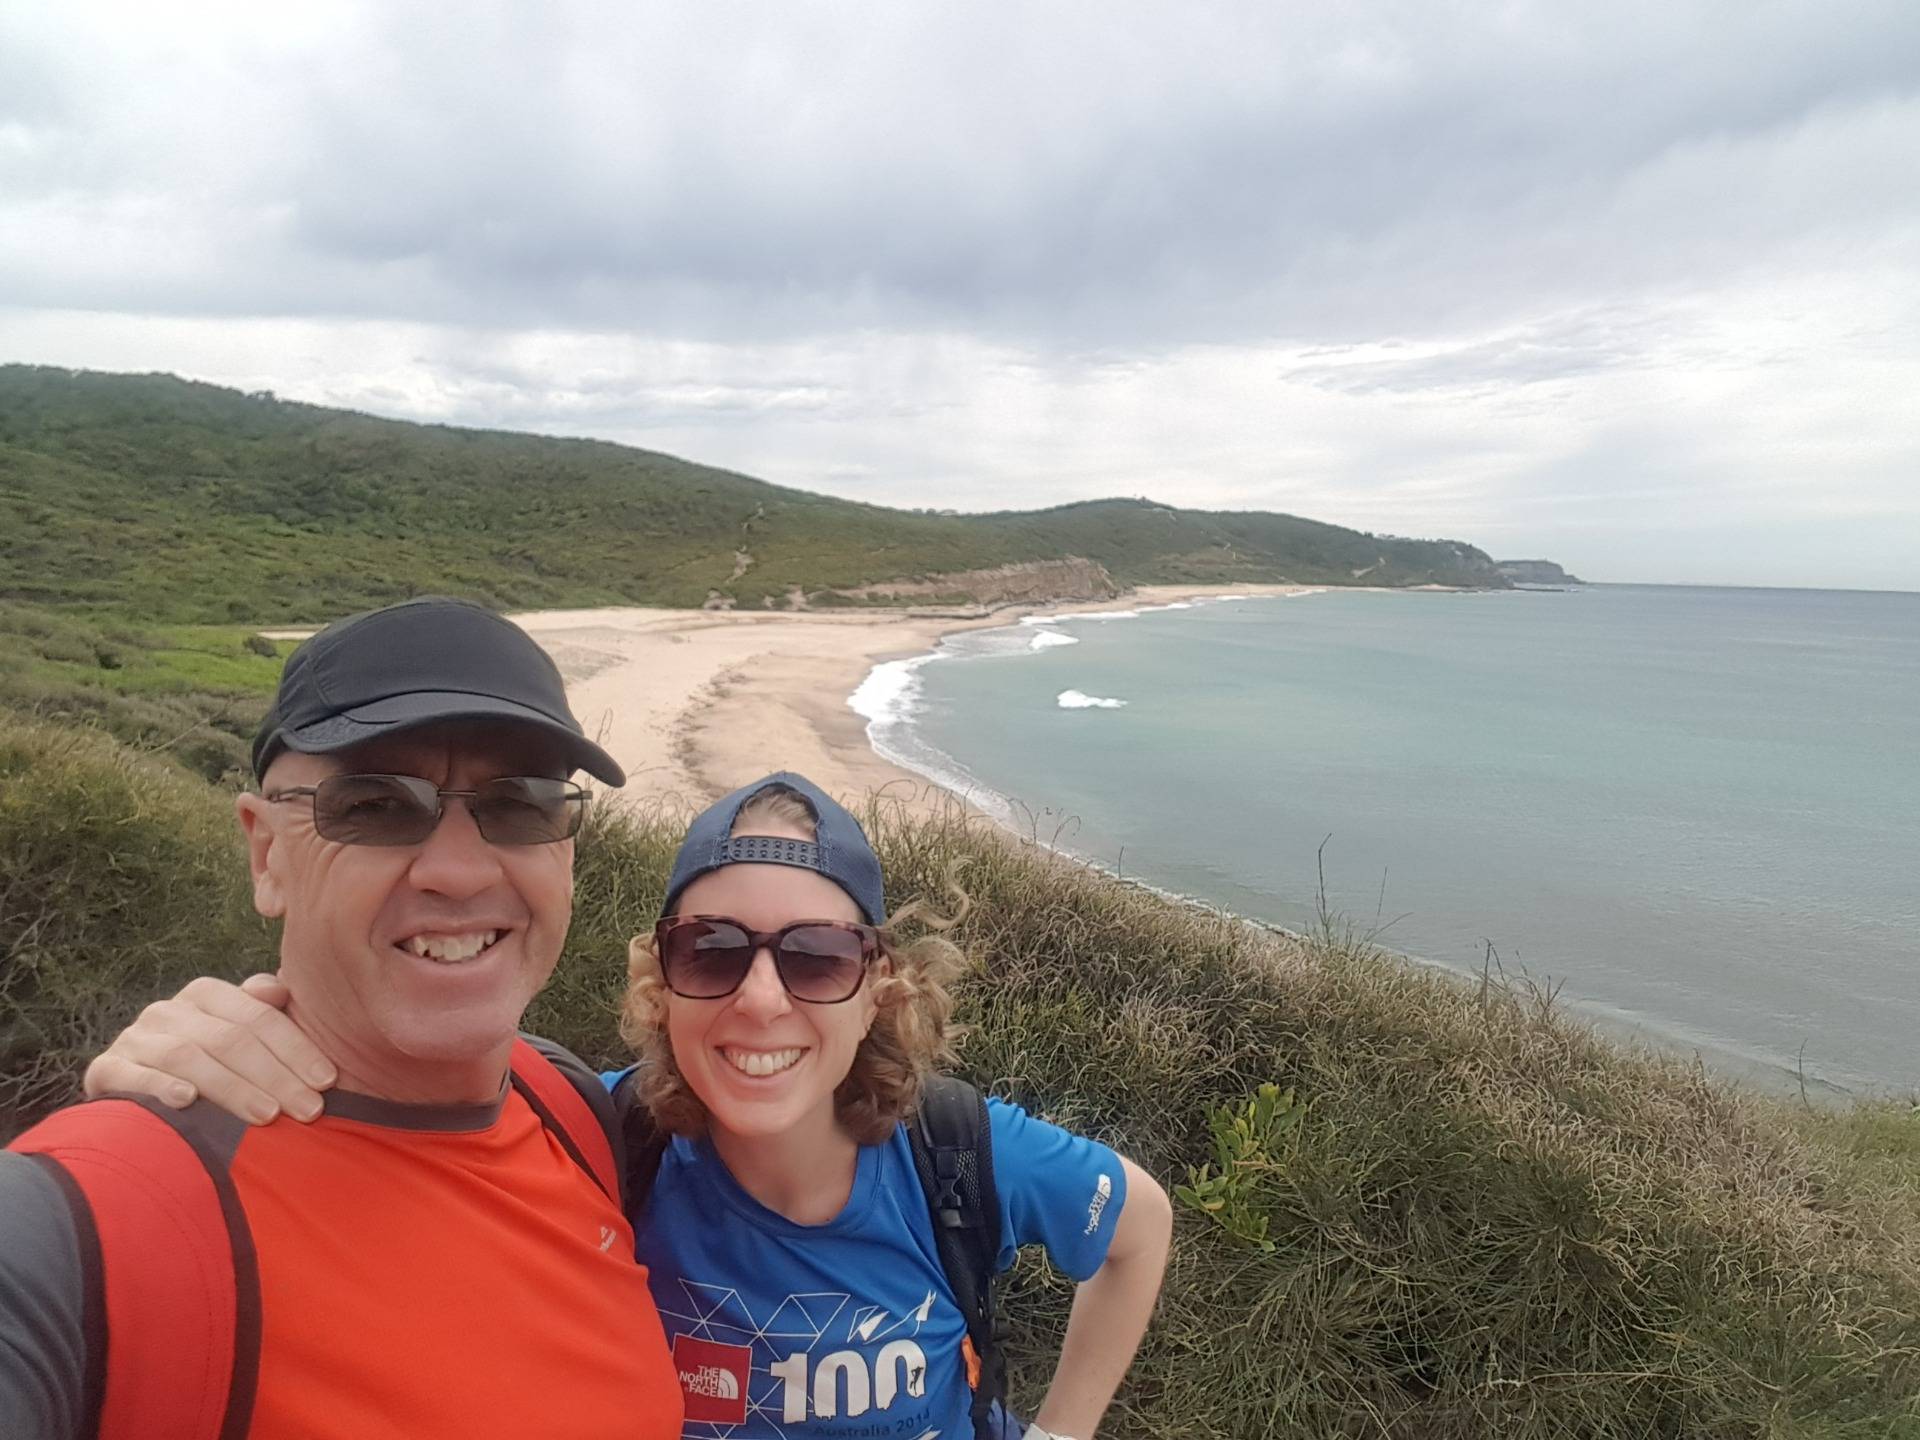 Us at the isolated Burwood beach in Glenrock.